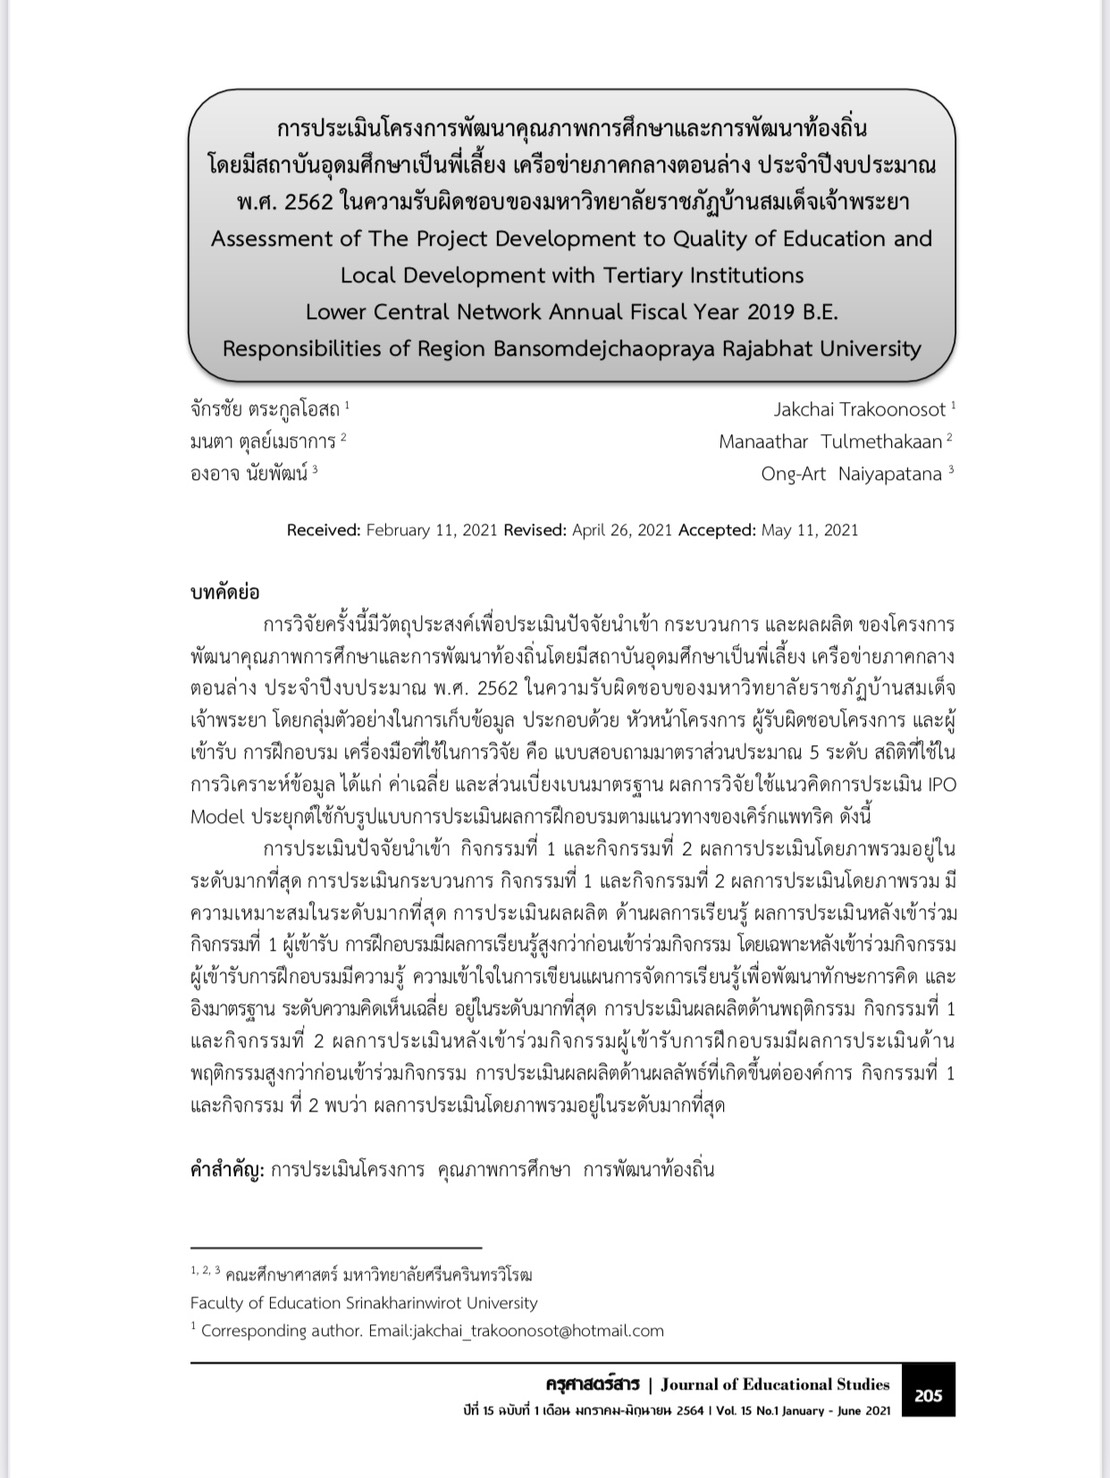 Assessment of The Project Development to Quality of Education and Local Development with Tertiary Institutions Lower Central Network Annual Fiscal Year 2019 B.E. Responsibilities of Region Bansomdejchaopraya Rajabhat University